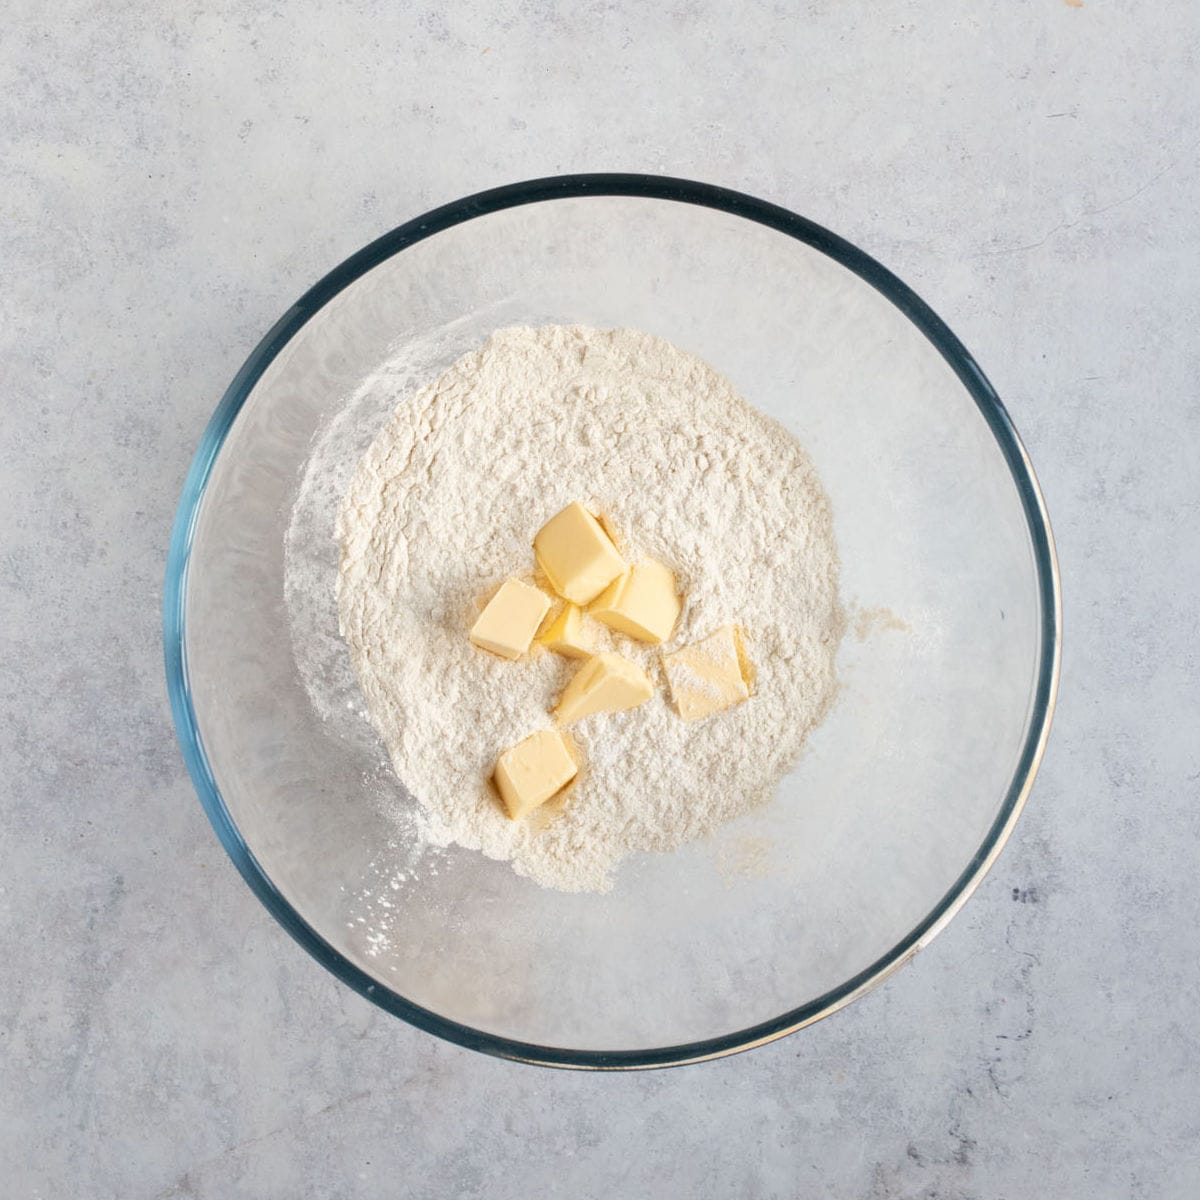 Butter and flour in a bowl.